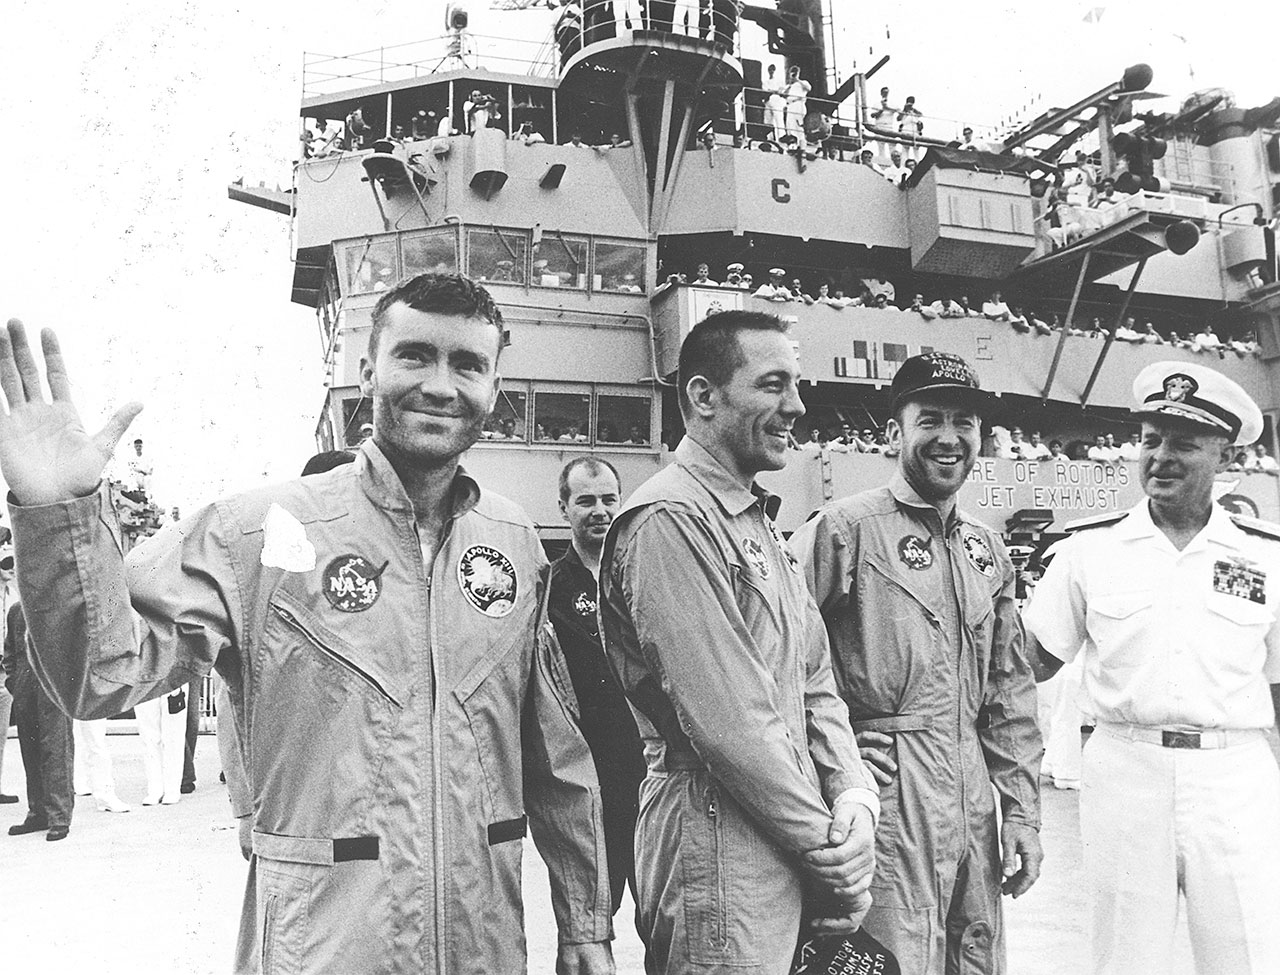 Apollo 13 astronauts Fred Haise, John Swigert, and James Lovell aboard the recovery ship USS Iwo Jima after safely touching down in the Pacific Ocean at the end of their ill-fated mission. The mission was aborted after 56 hours of flight, 205,000 miles from Earth, when an oxygen tank in the service module exploded. Image credit: NASA